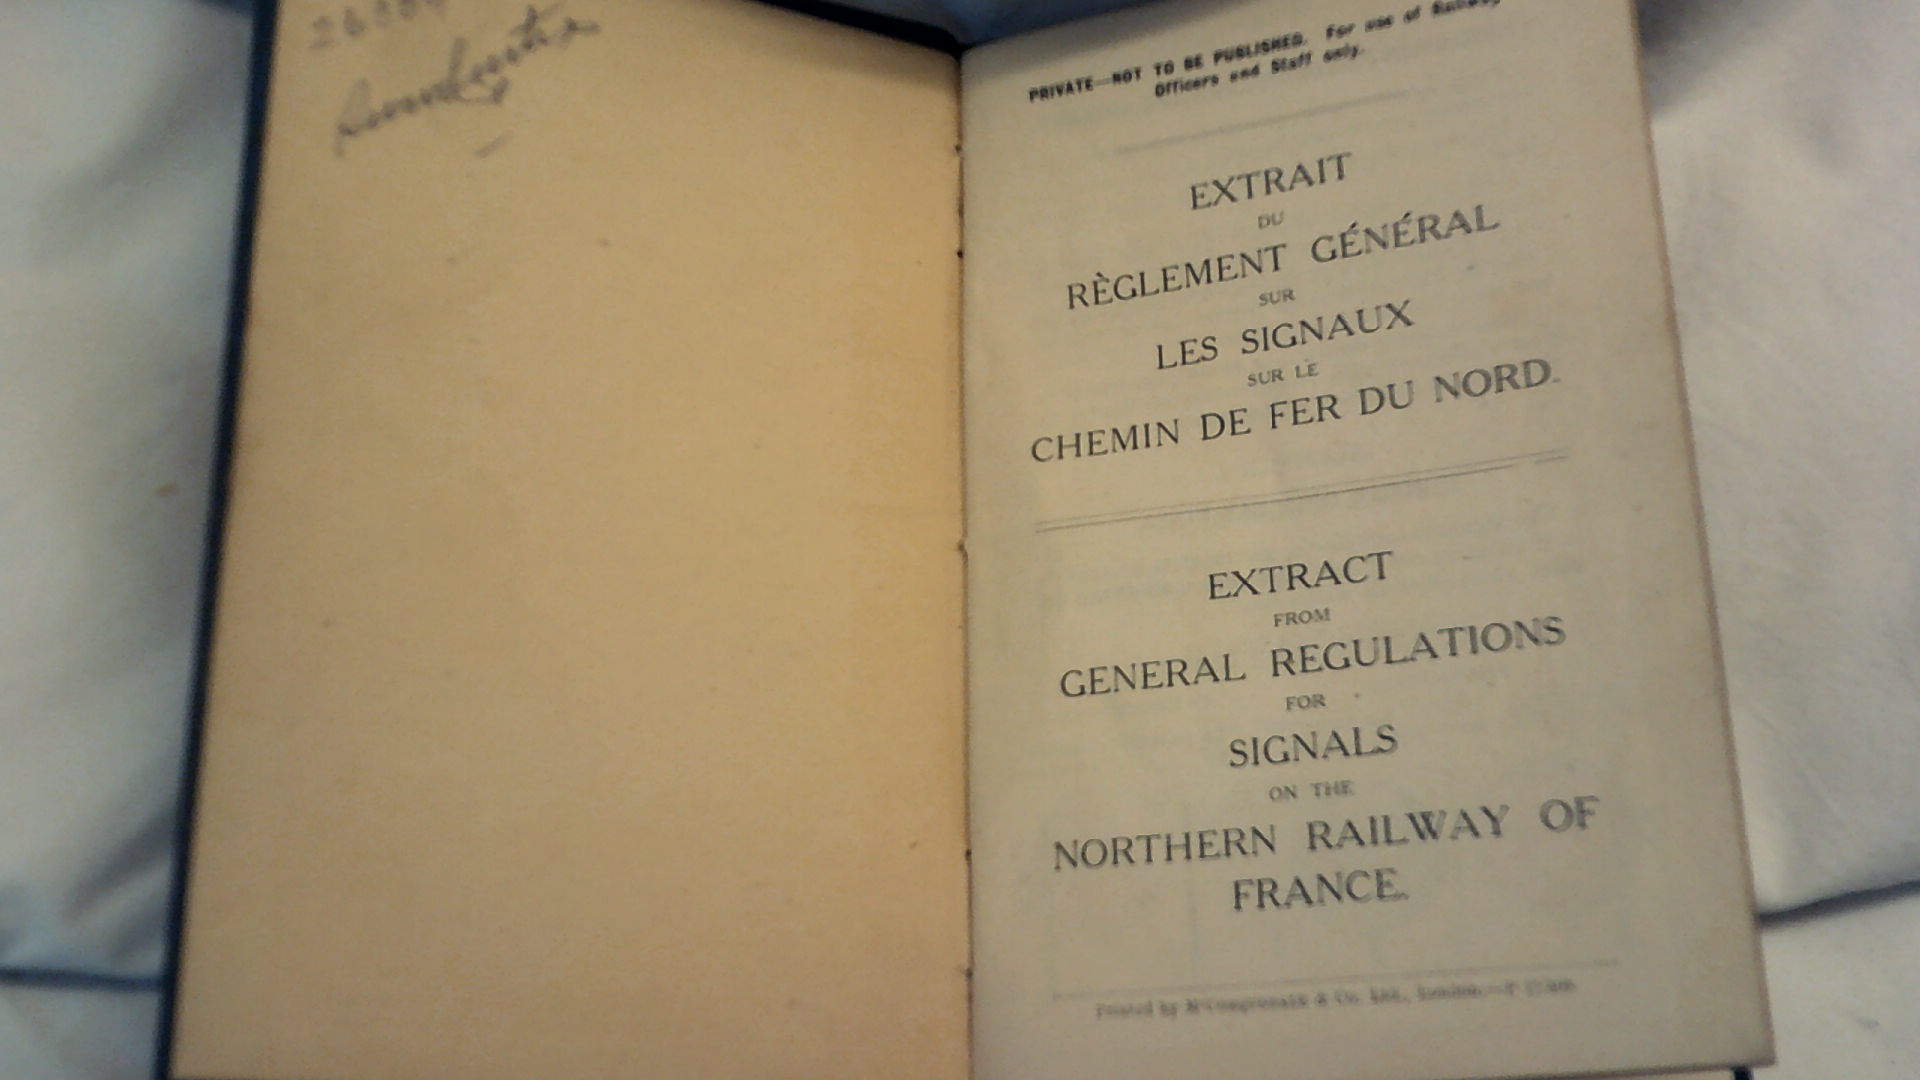 Extract from General Regulations for Signals on the Northern Railway of France 'Extrait Du